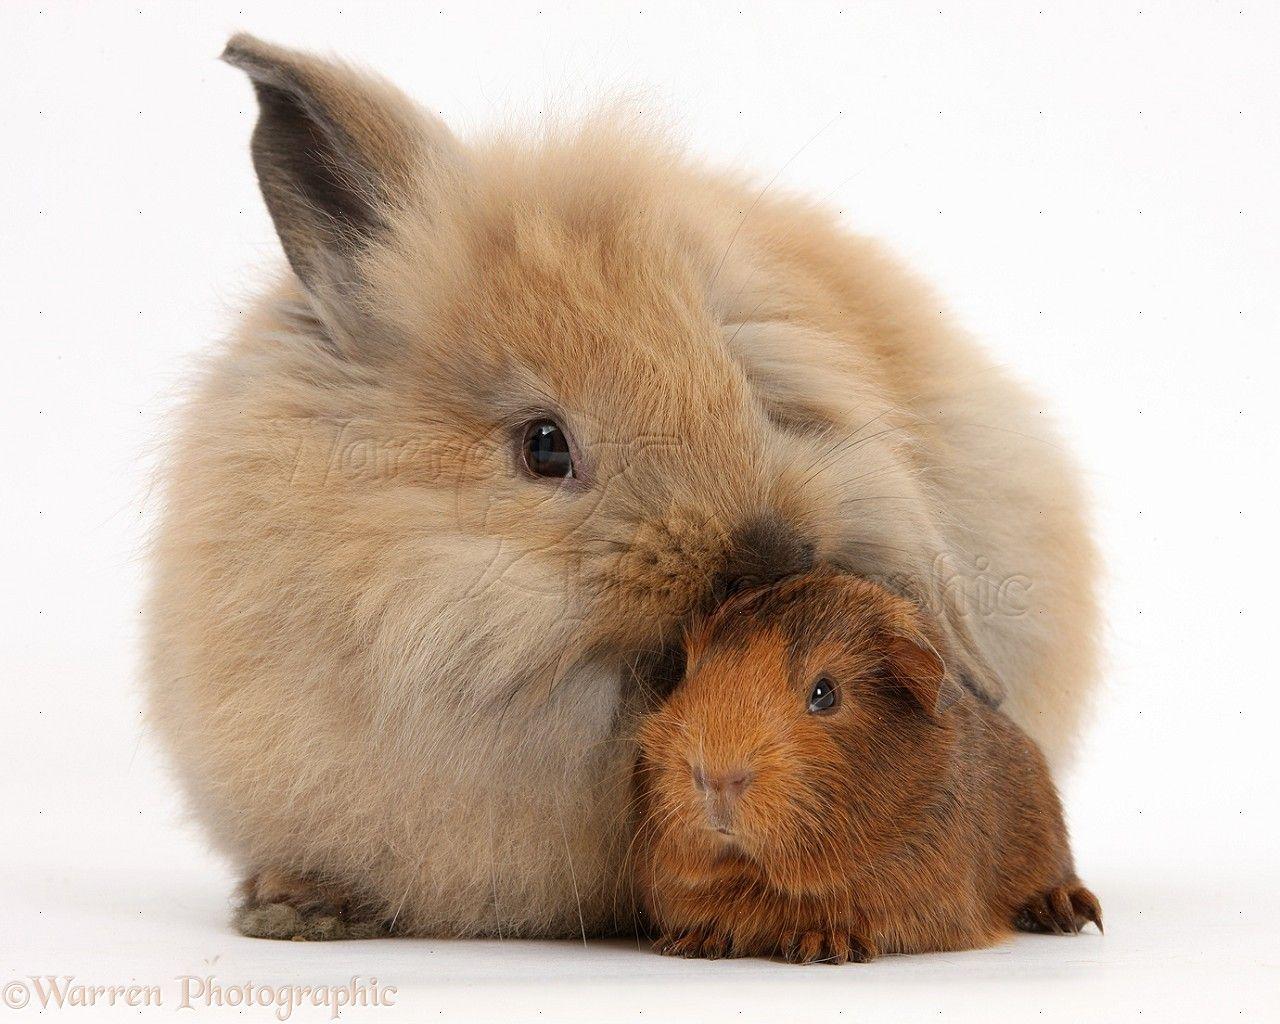 Pets: Windmill Eared Lionhead X Lop Rabbit And Baby Guinea Pig Photo